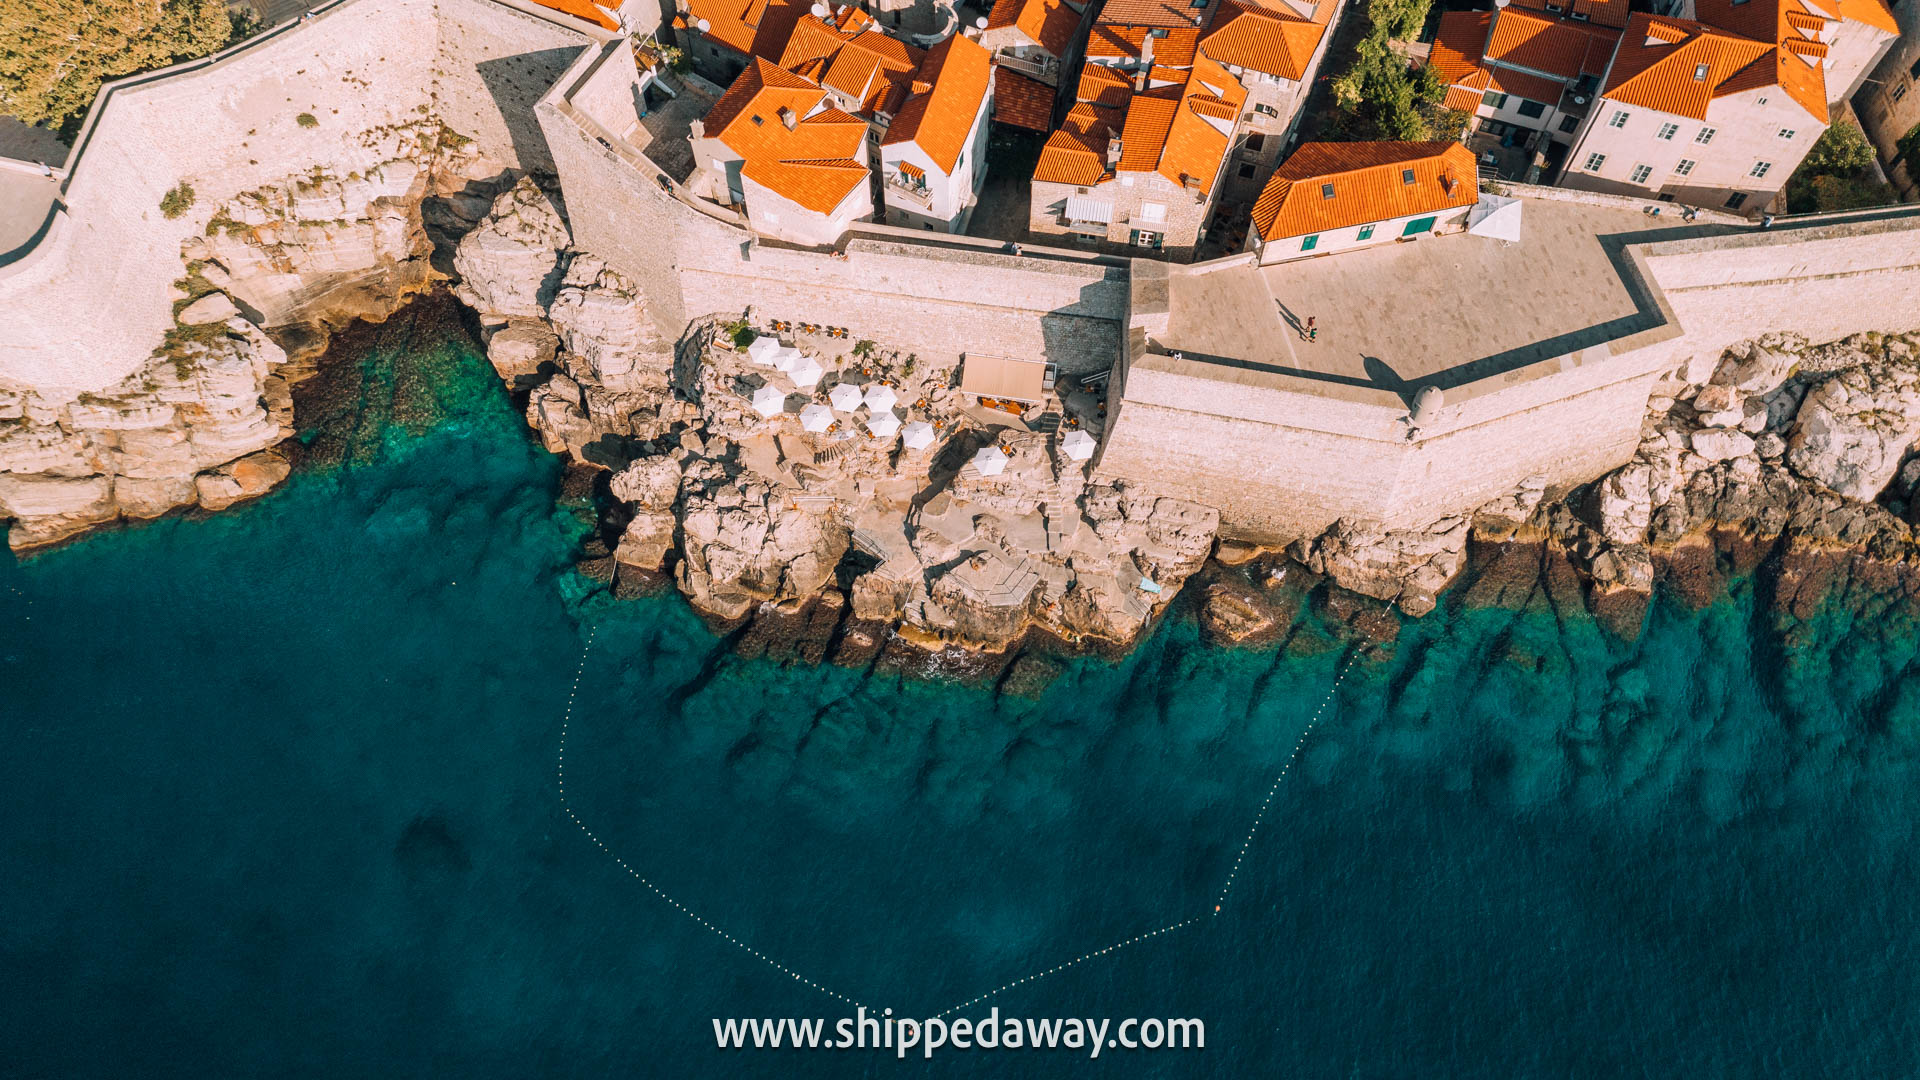 Best Dubrovnik Bars and Beach Clubs - Best Dubrovnik Bars by a Local - Beach Bars Dubrovnik - Buža Bar Dubrovnik - Cliff Jumping Bar Dubrovnik